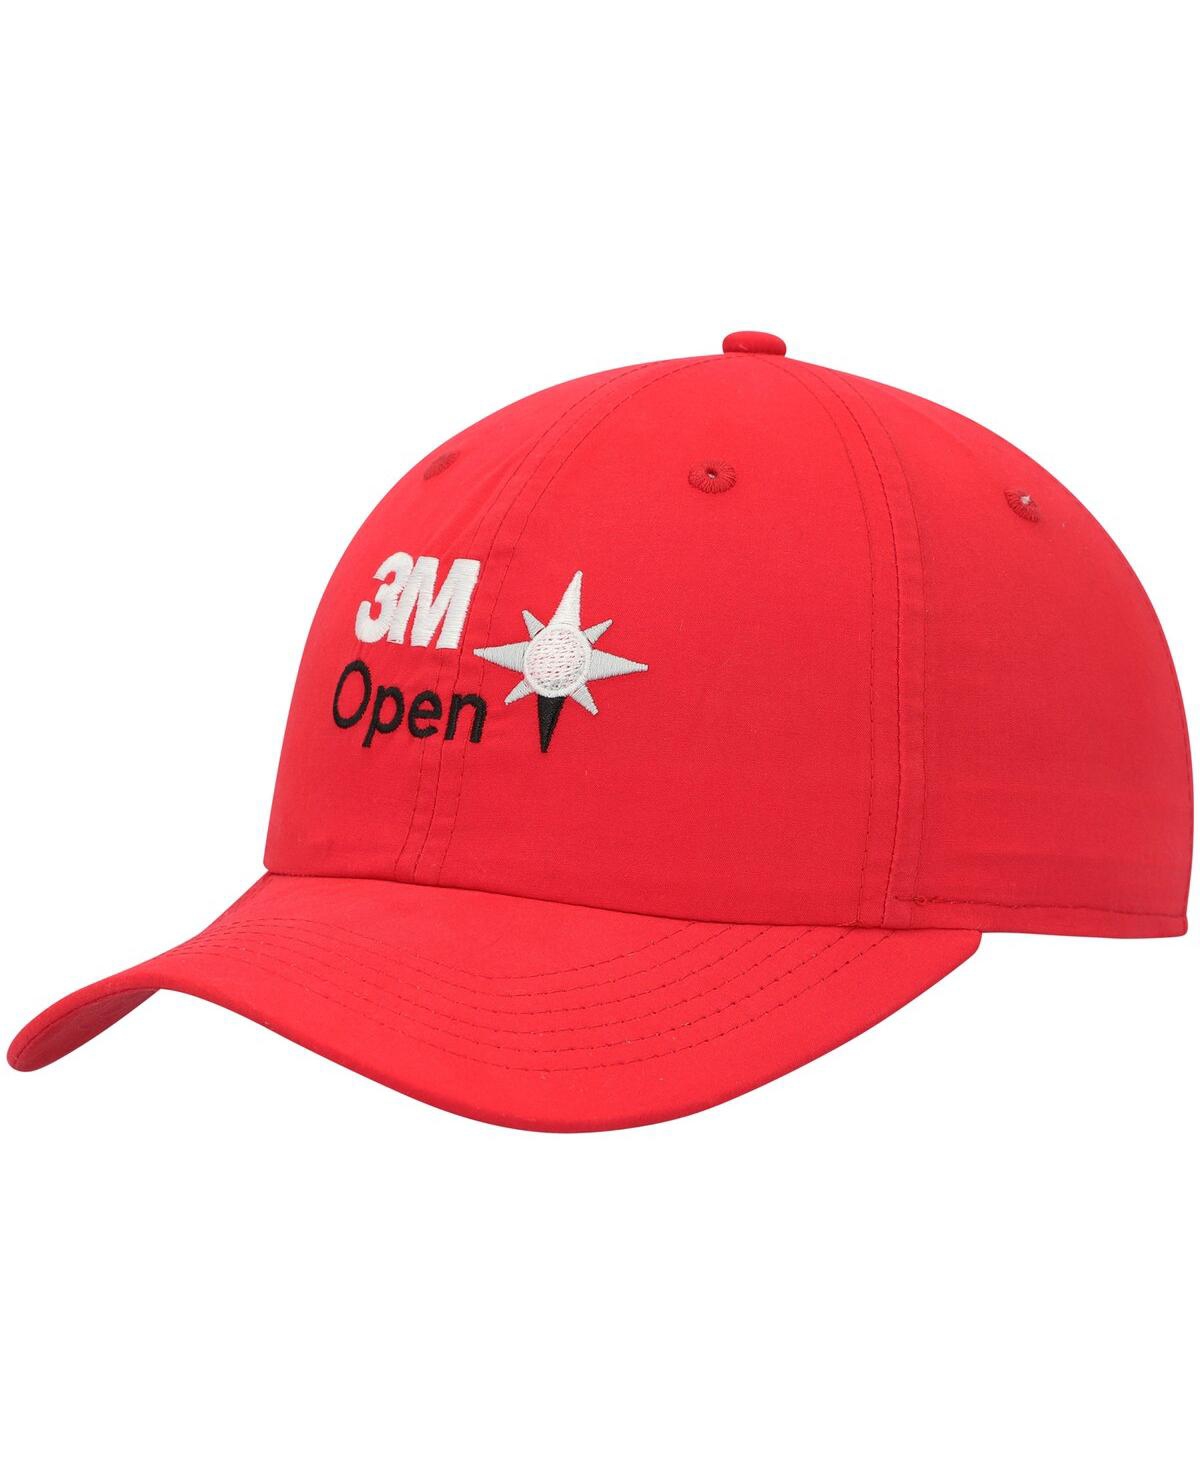 IMPERIAL MEN'S IMPERIAL RED 3M OPEN ADJUSTABLE HAT